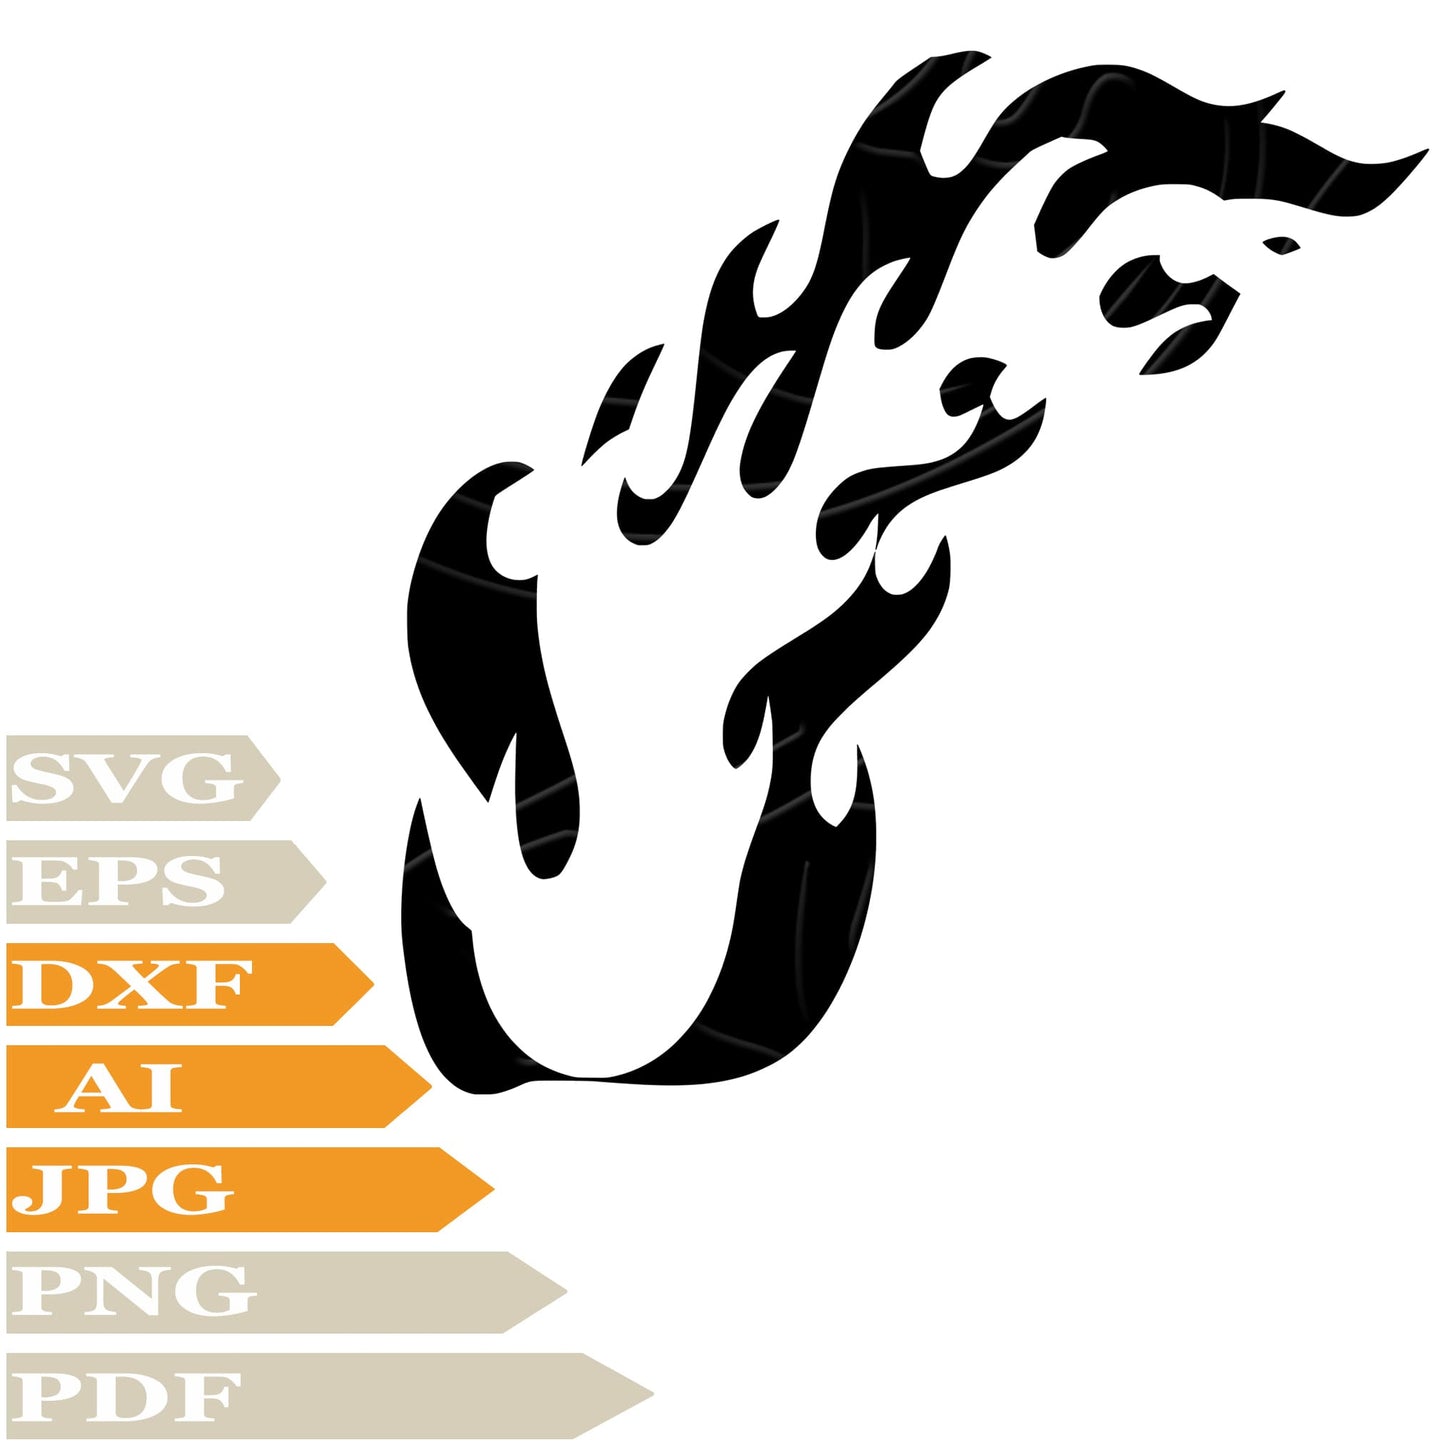 Fire SVG, Flame Of Fire SVG Design, Flame Of Fire PNG, Fire Vector Graphics, Fire Digital Instant Download, Flame Of Fire For Cricut, Clip Art, Cut File, T-Shirts, Silhouette